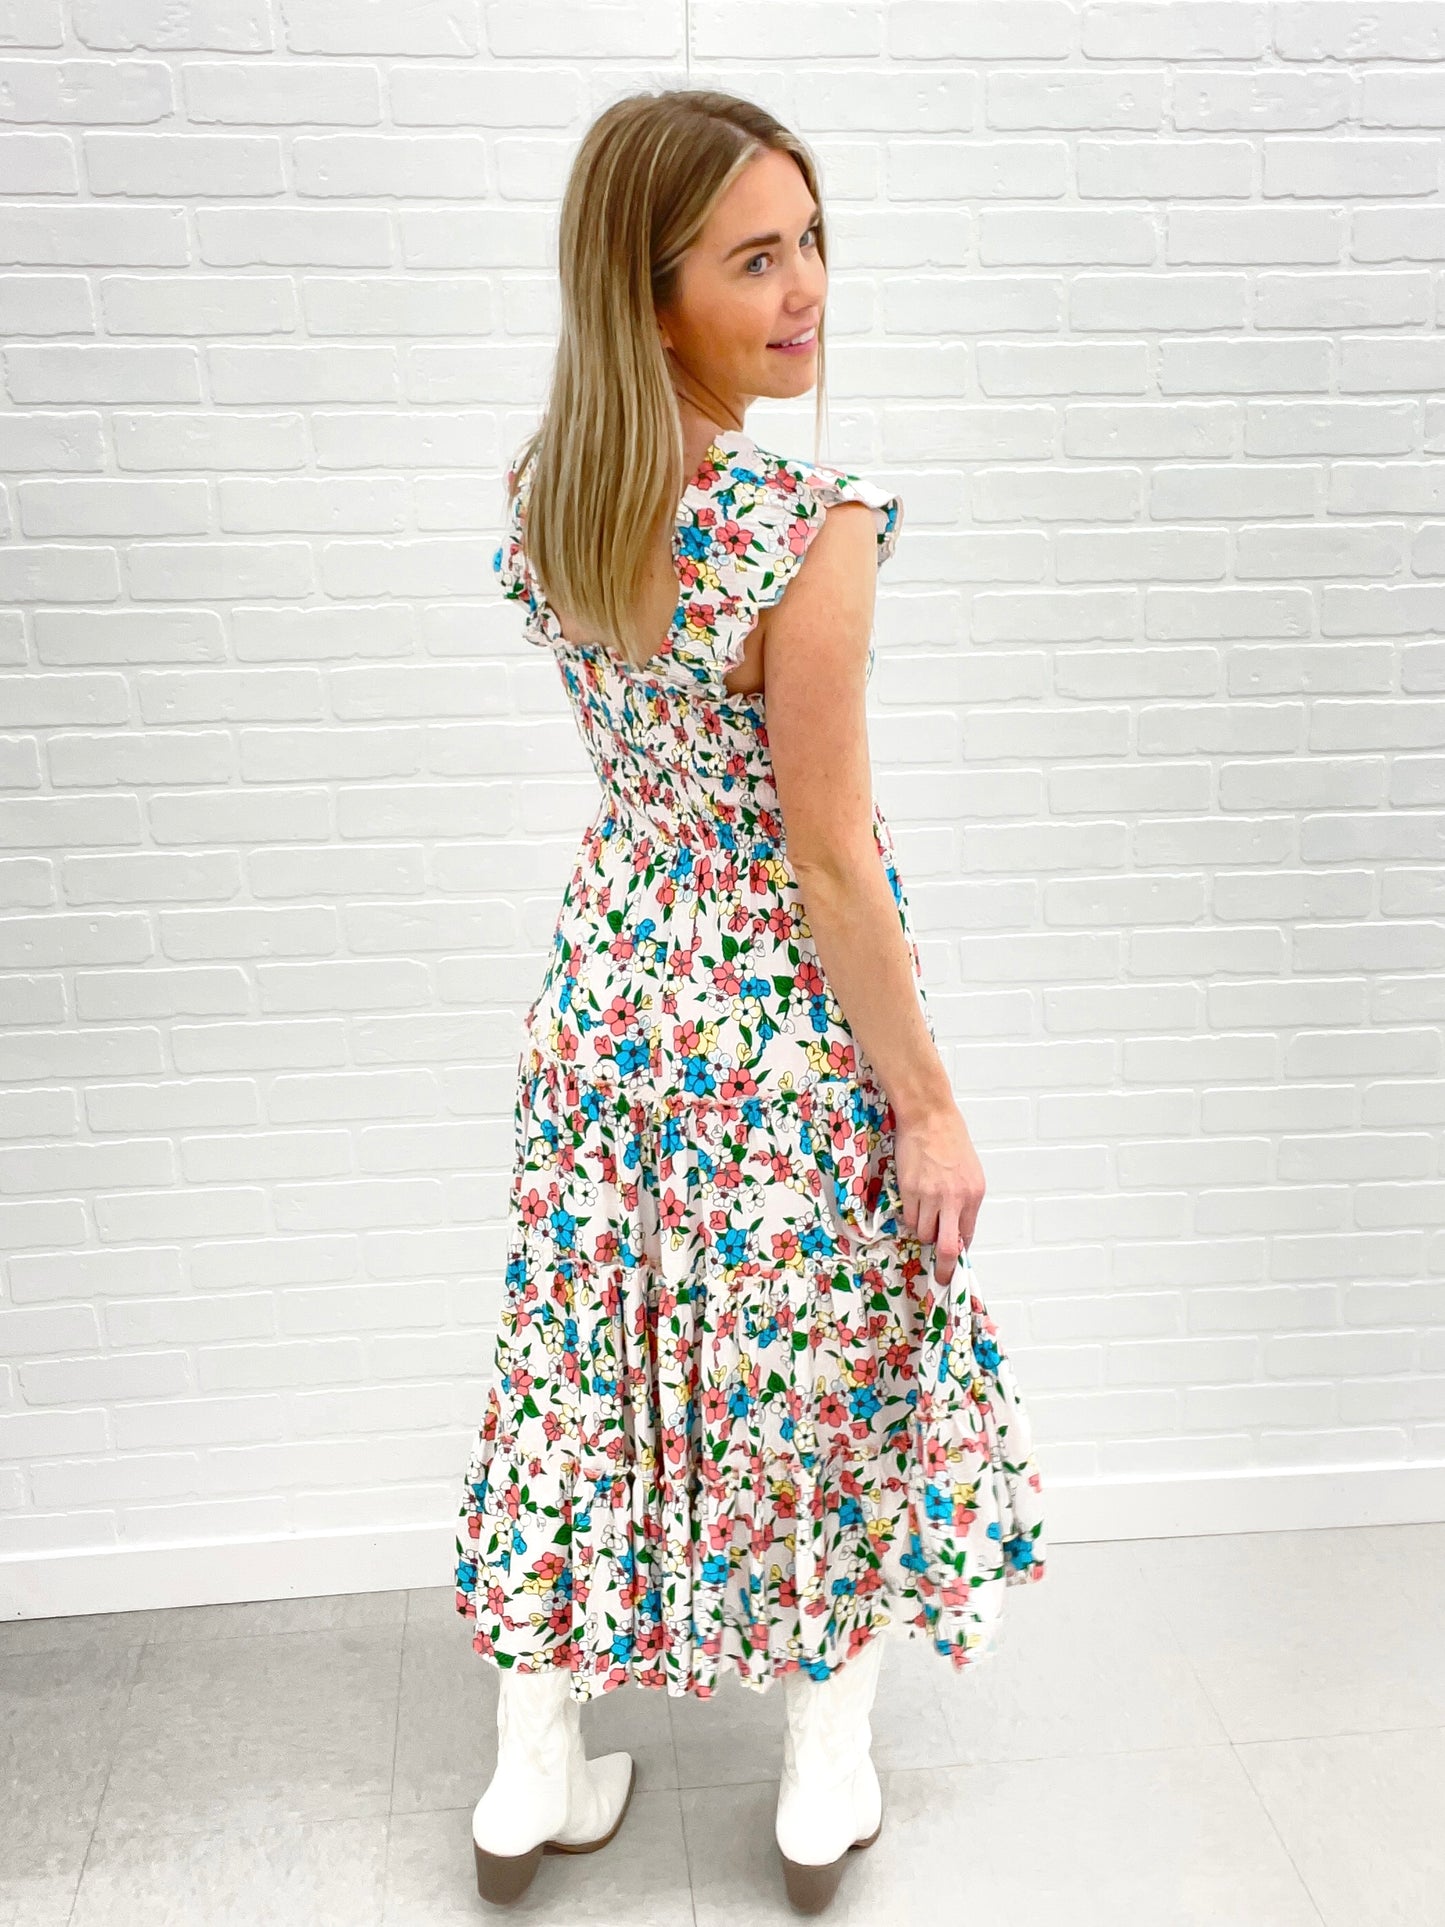 She Blooms Floral Print Tiered Dress